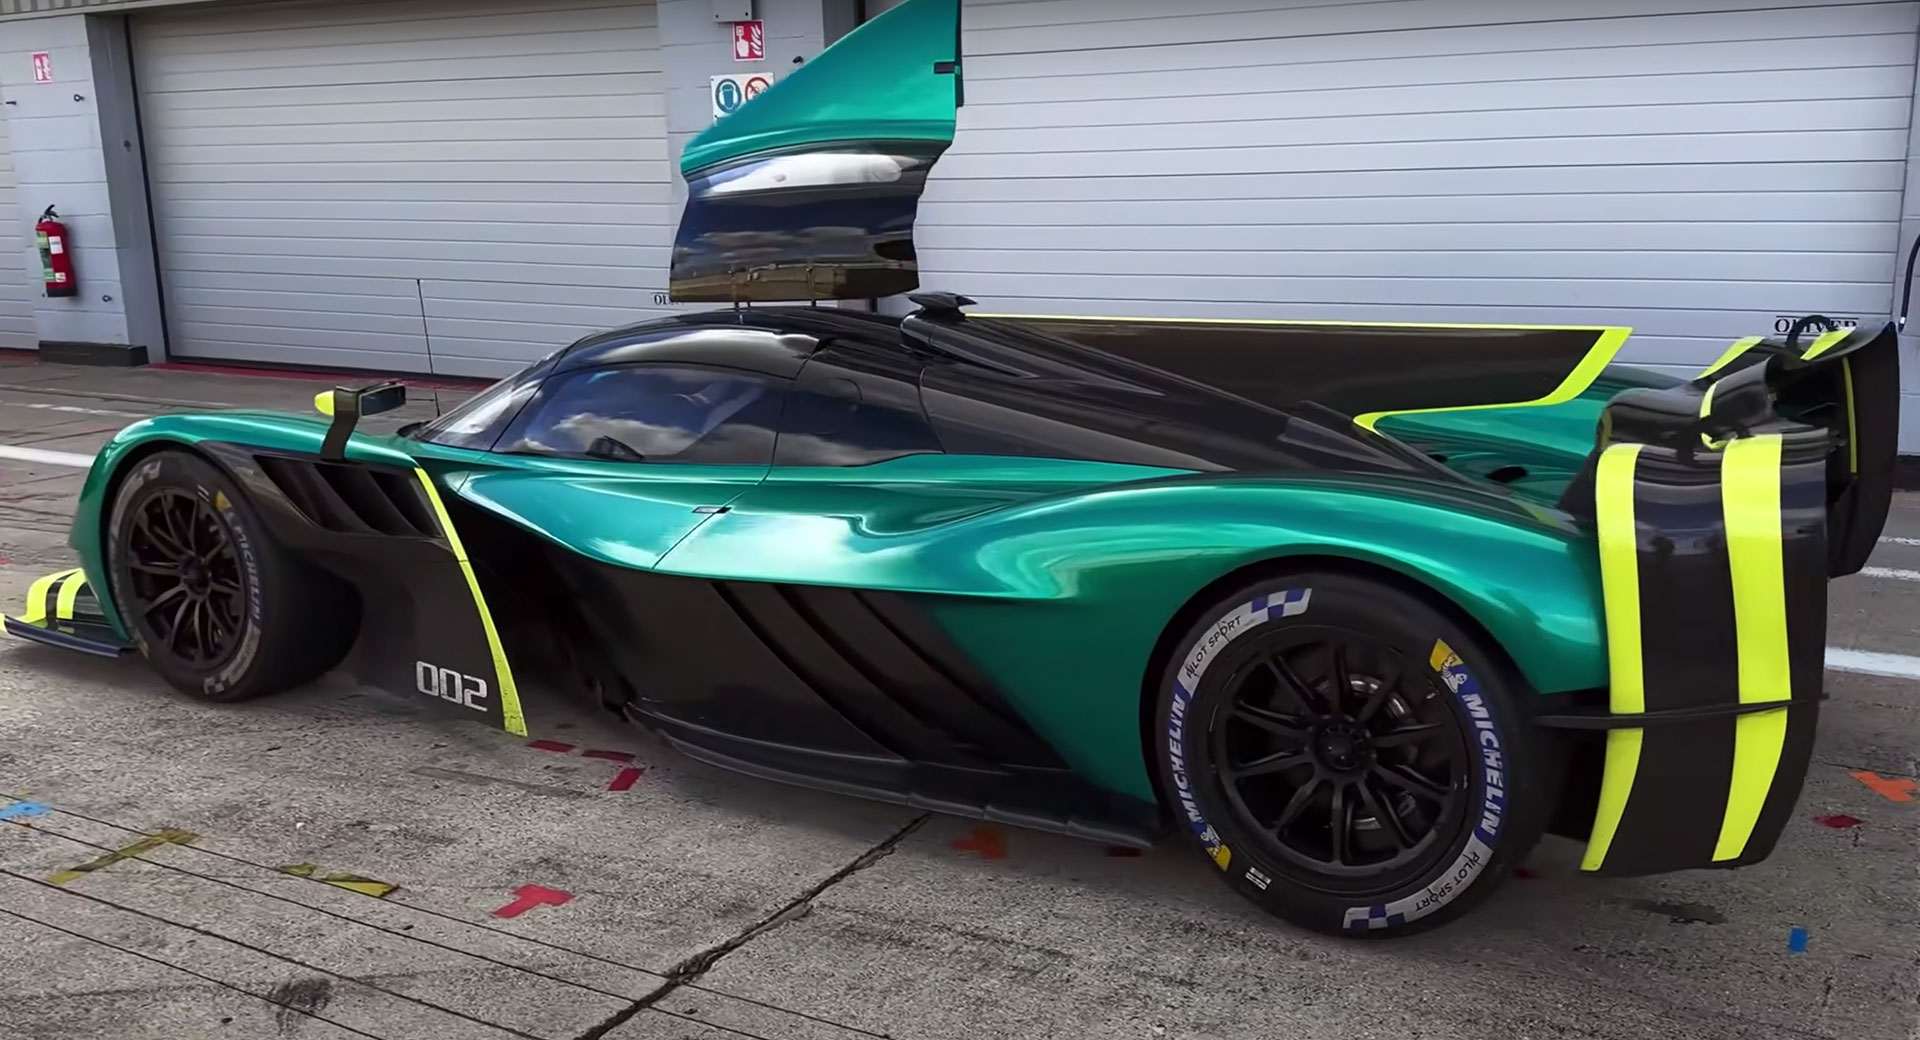 Go For A Ride In The Aston Martin Valkyrie Amr Pro With F1 Driver Nico